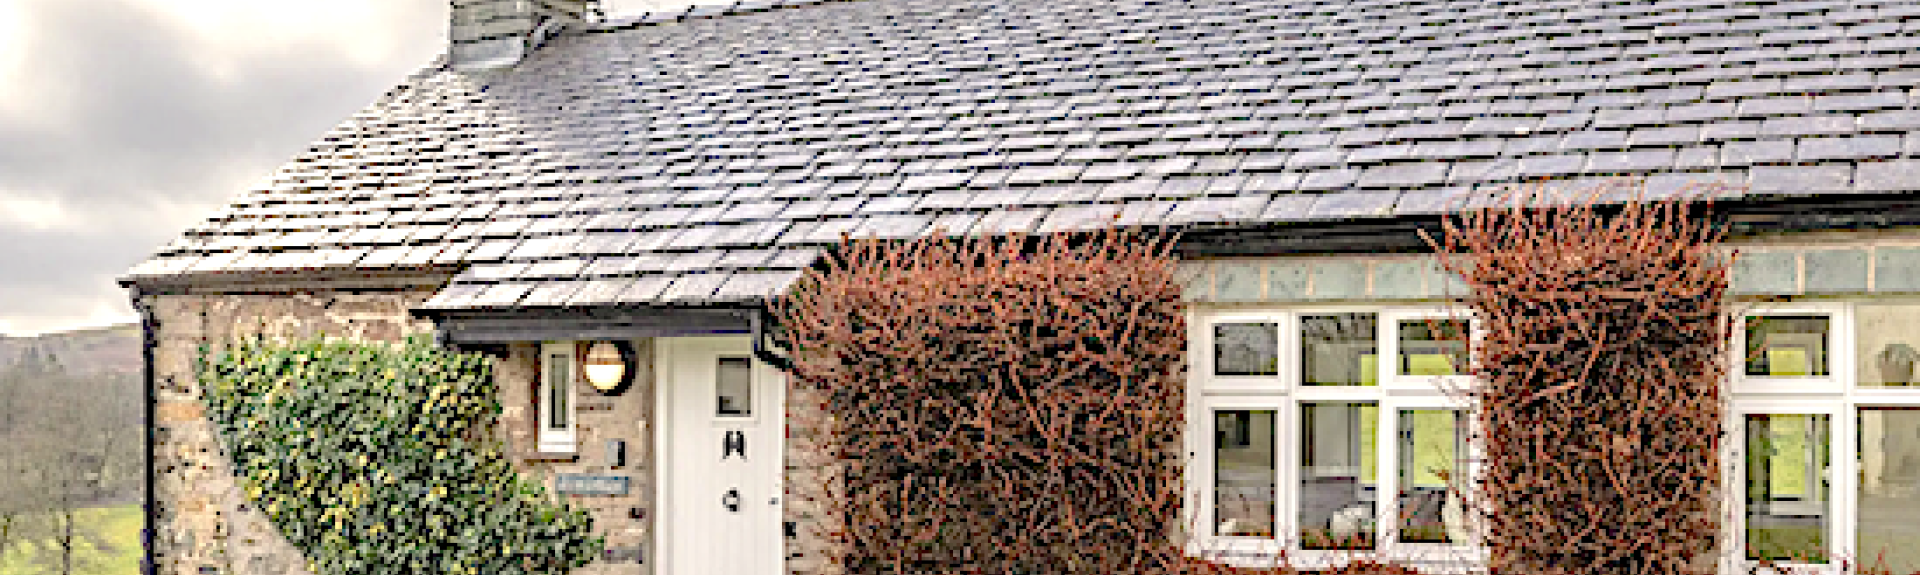 A stone-built,single storey holiday cottage with vine covered walls and a front garden.